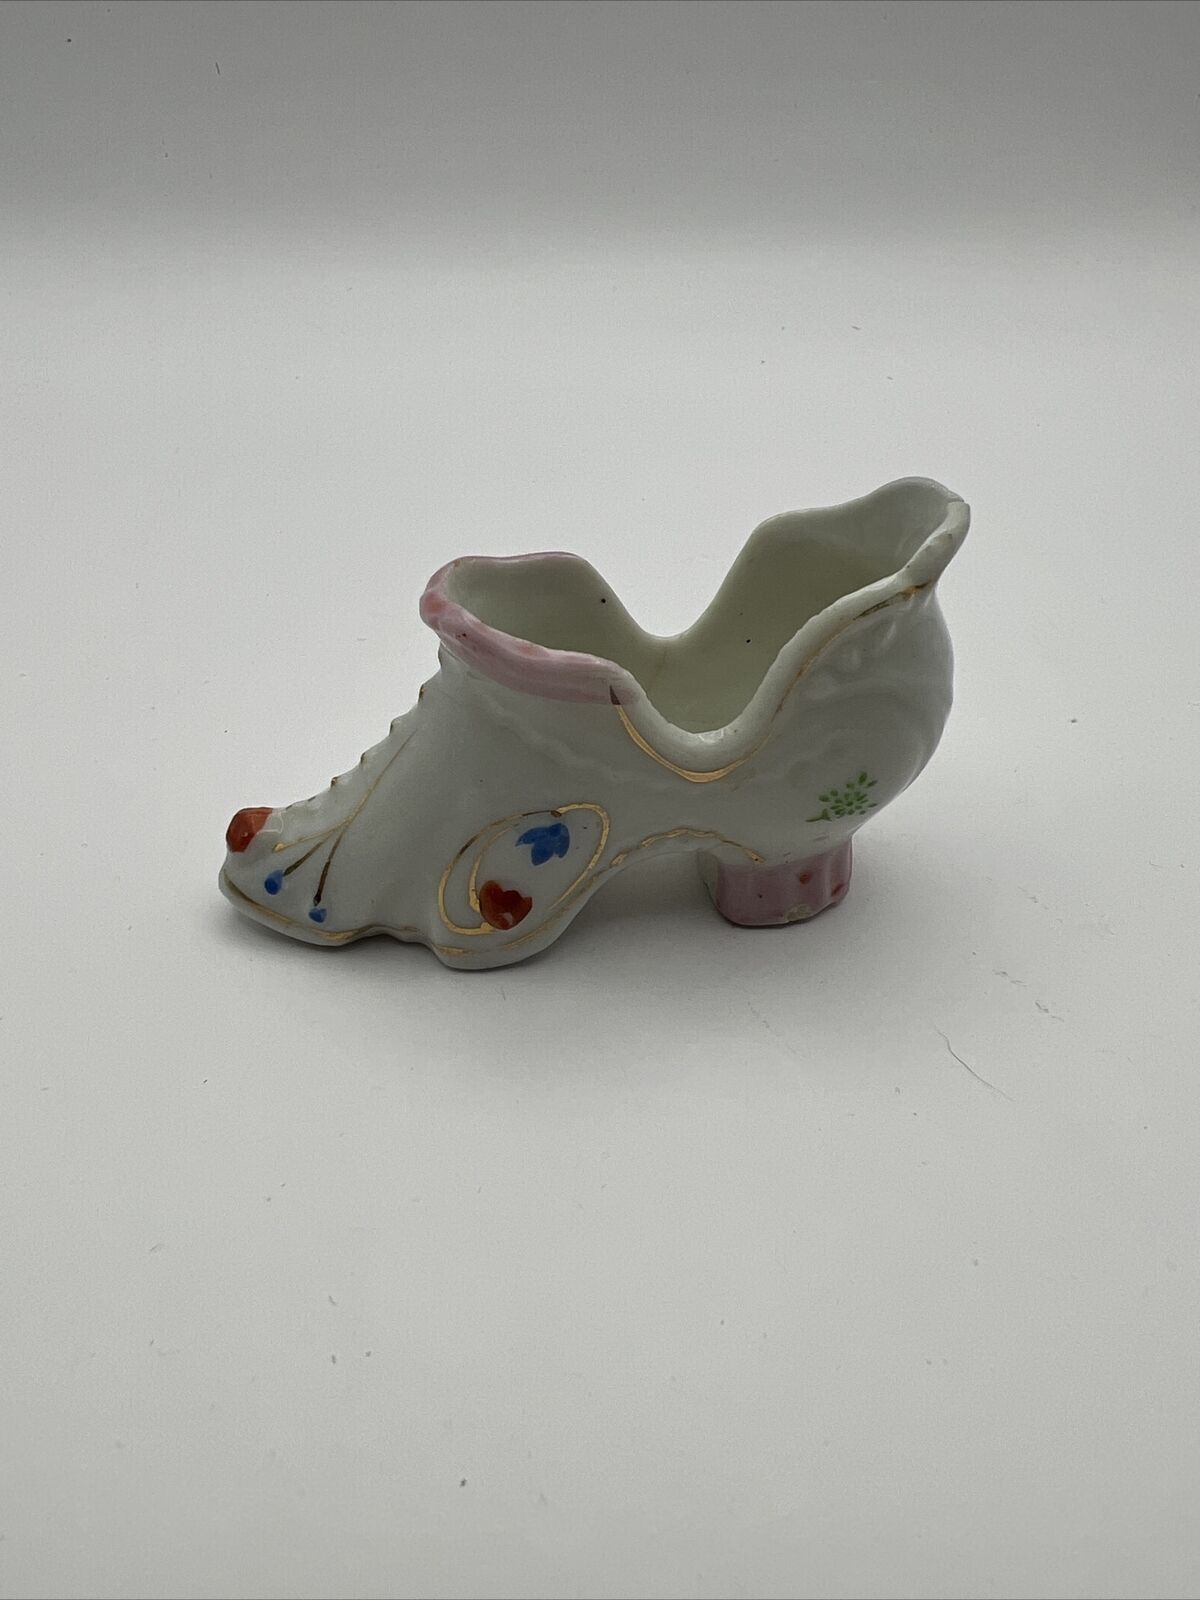 PICO Miniature Porcelain Shoe, Made in Occupied Japan Y2